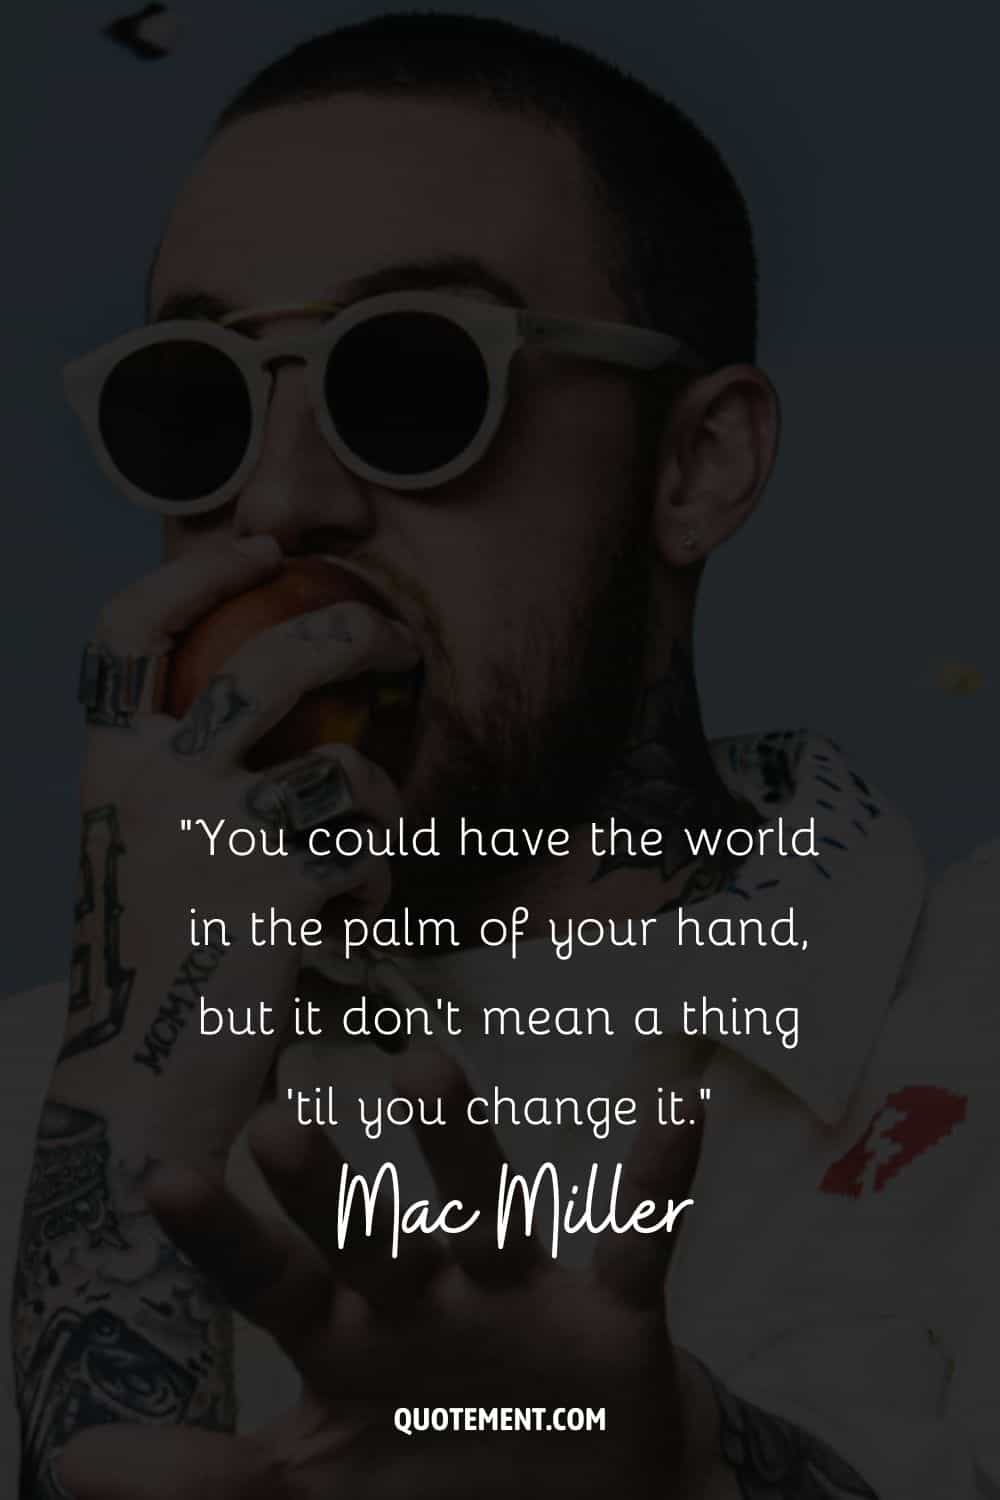 “You could have the world in the palm of your hand, but it don’t mean a thing ’til you change it.” – Mac Miller